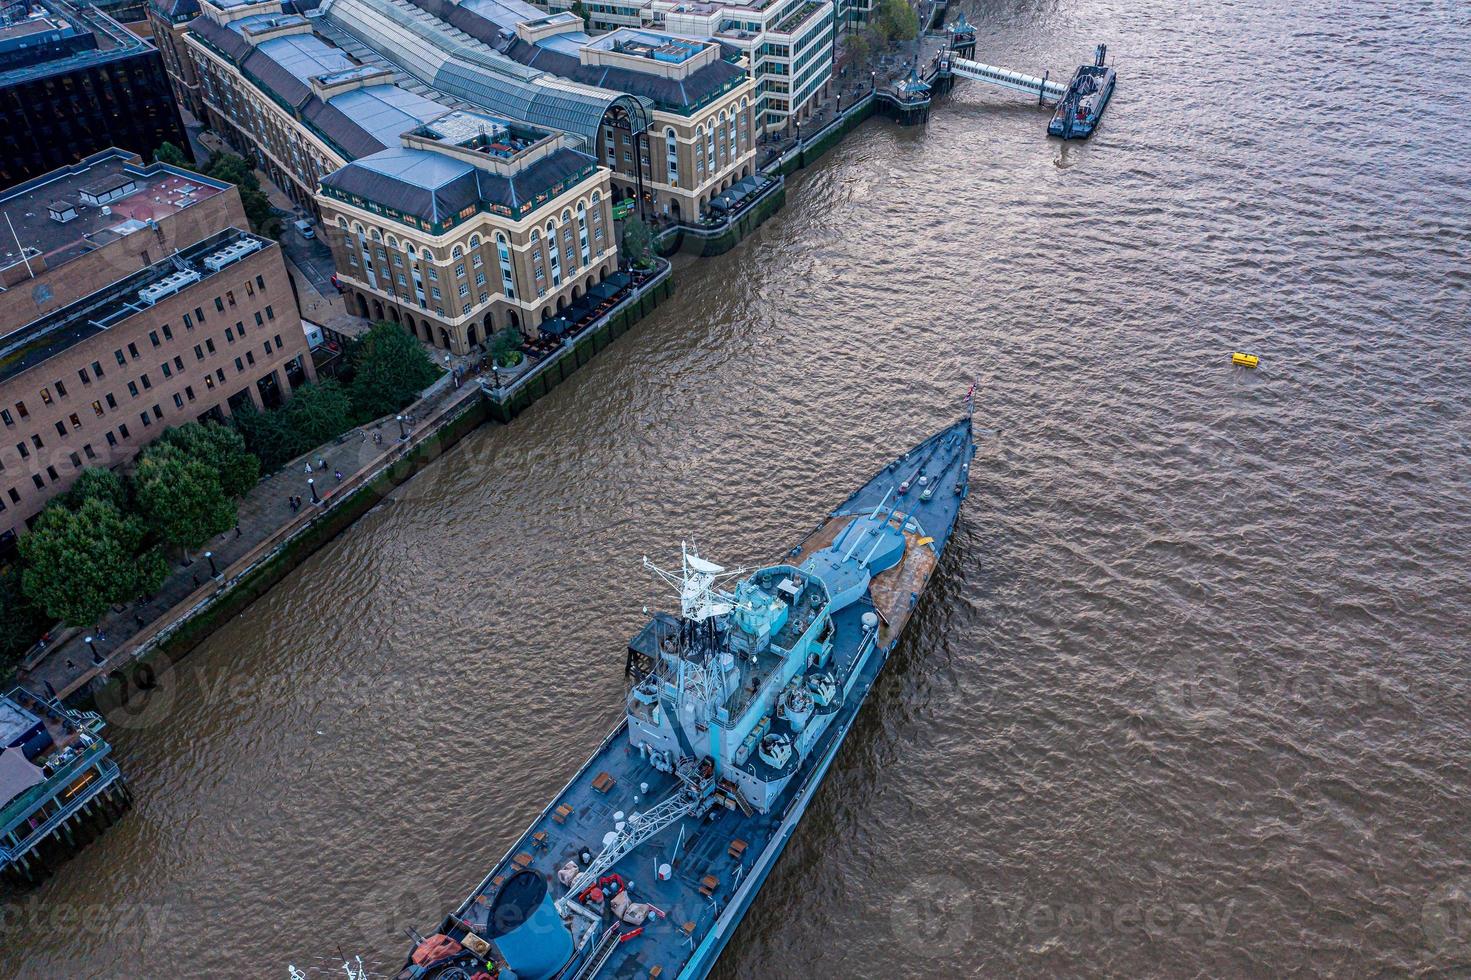 Navy ship museum on the river Thames photo